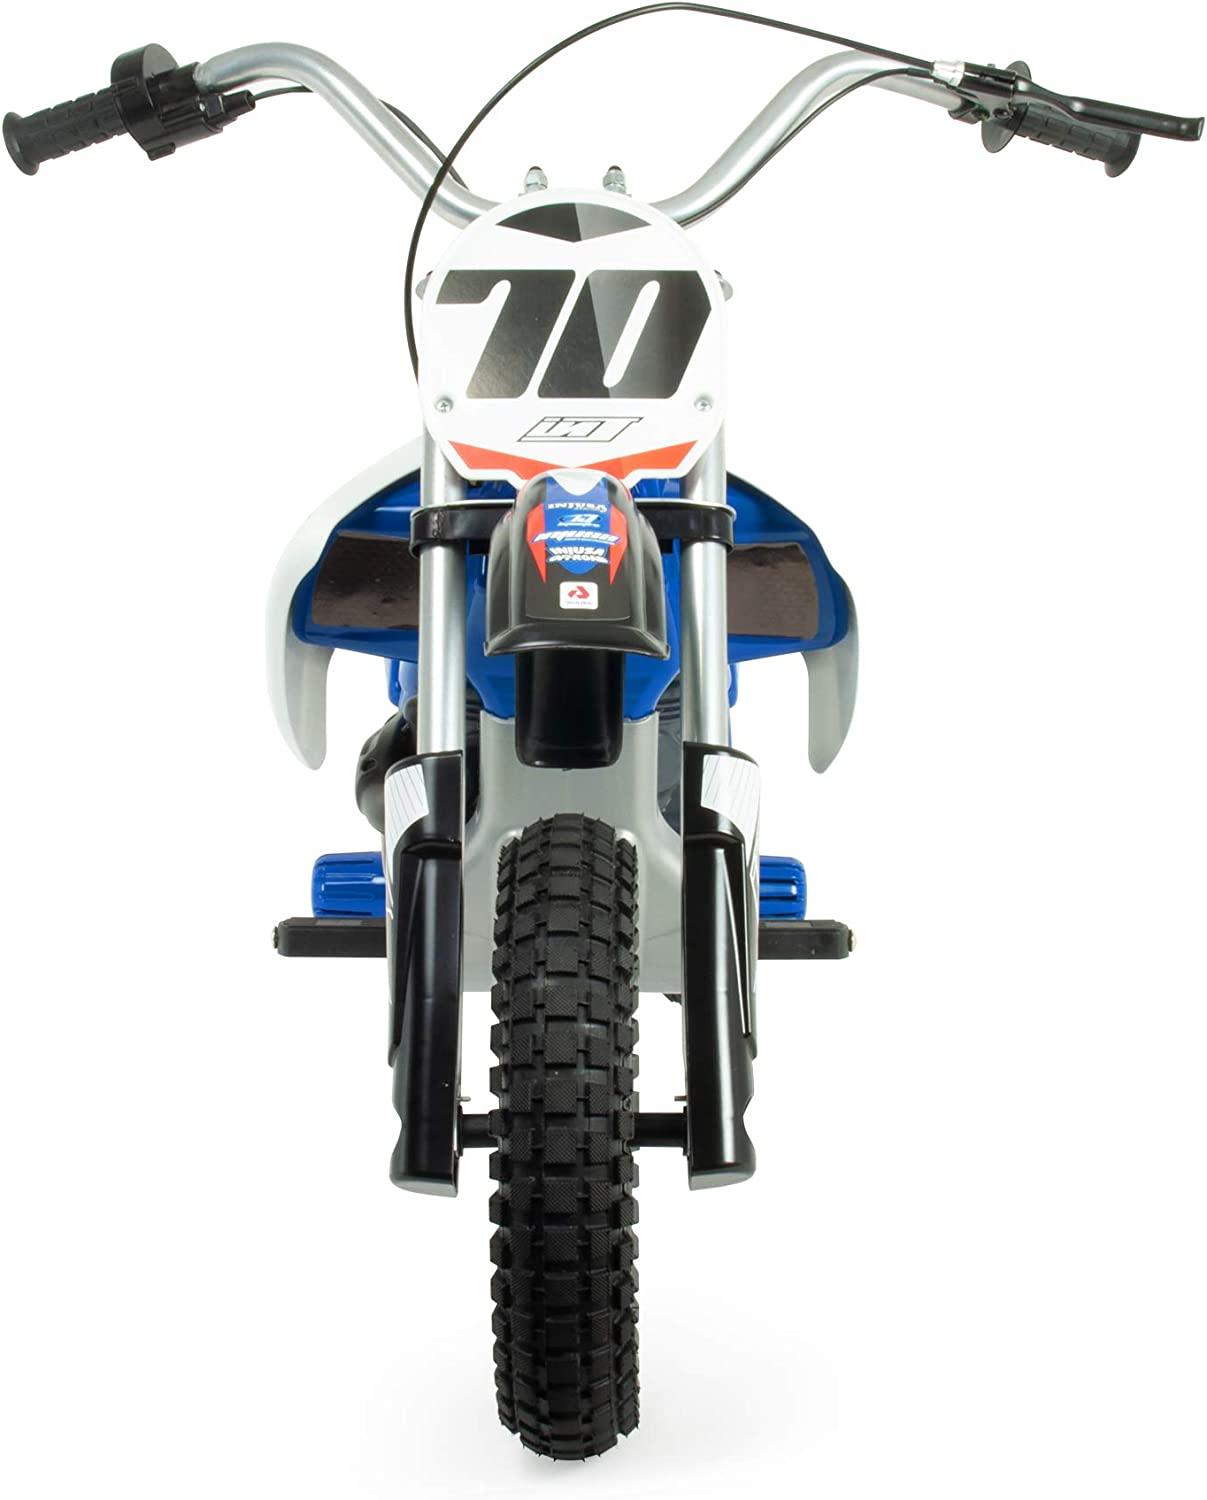 PATOYS | Injusa | Blue Fighter Motorcycle 24 Volt dirt bike for Children with Electric Brake Model: 6832 Ride on Bike Injusa